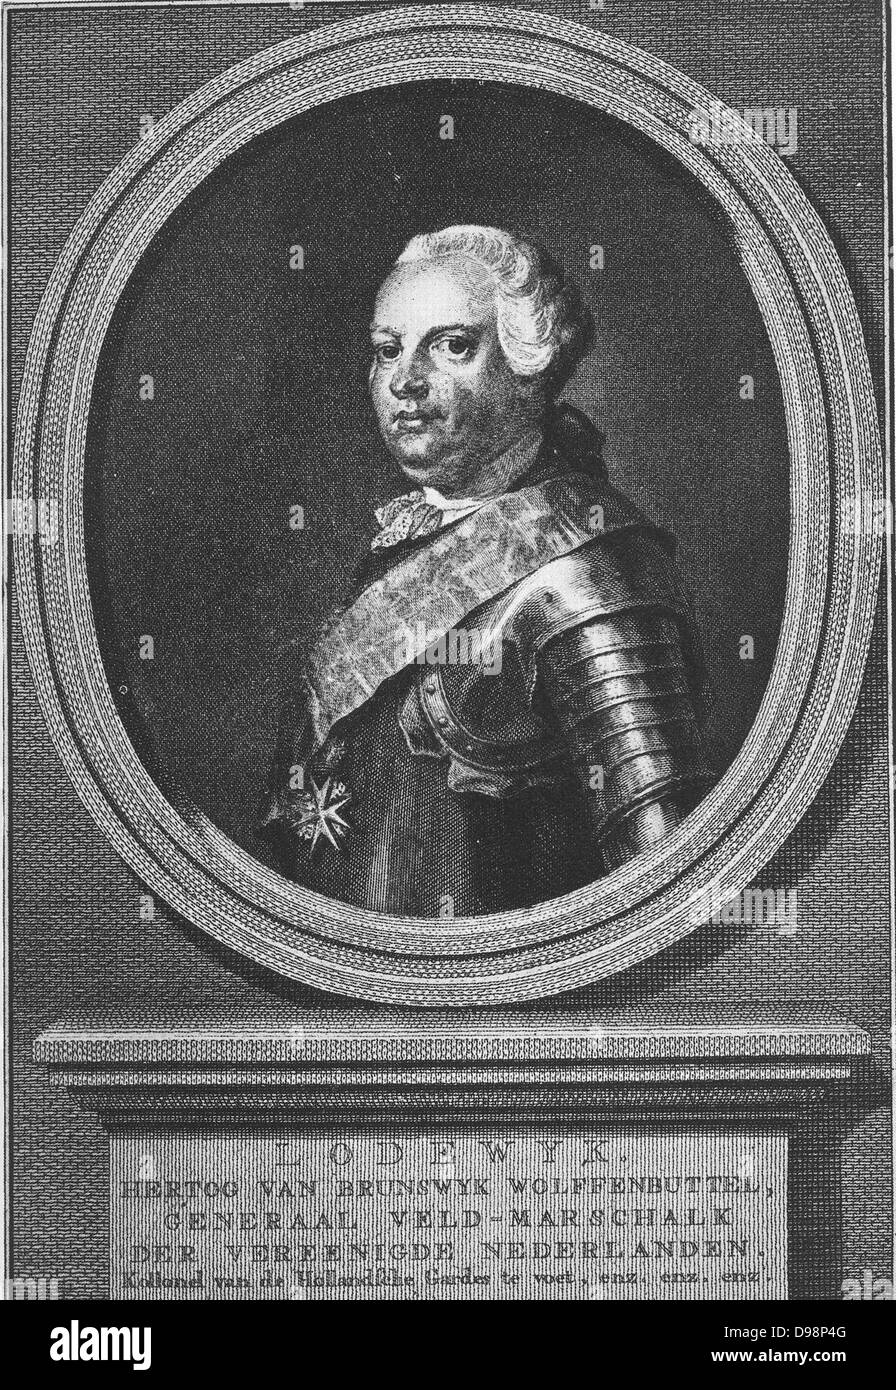 Louis Ernest of Brunswick-Lüneburg-Bevern (25 September 1718, Wolfenbüttel - 12 May 1788, Eisenach) was a field-marshal in the armies of the Holy Roman Empire and the Dutch Republic. From 13 November 1750 to 1766 he was the Captain-General of the Netherlands, where he was known as the Duke of Brunswick or (to distinguish him from his eldest brother Charles, who succeeded to their father's title of Duke of Brunswick-Lüneburg) Duke of Brunswick-Wolfenbüttel. Another brother was Duke Ferdinand of Brunswick who led the Allied Anglo-German army during the Seven Years' War. Stock Photo